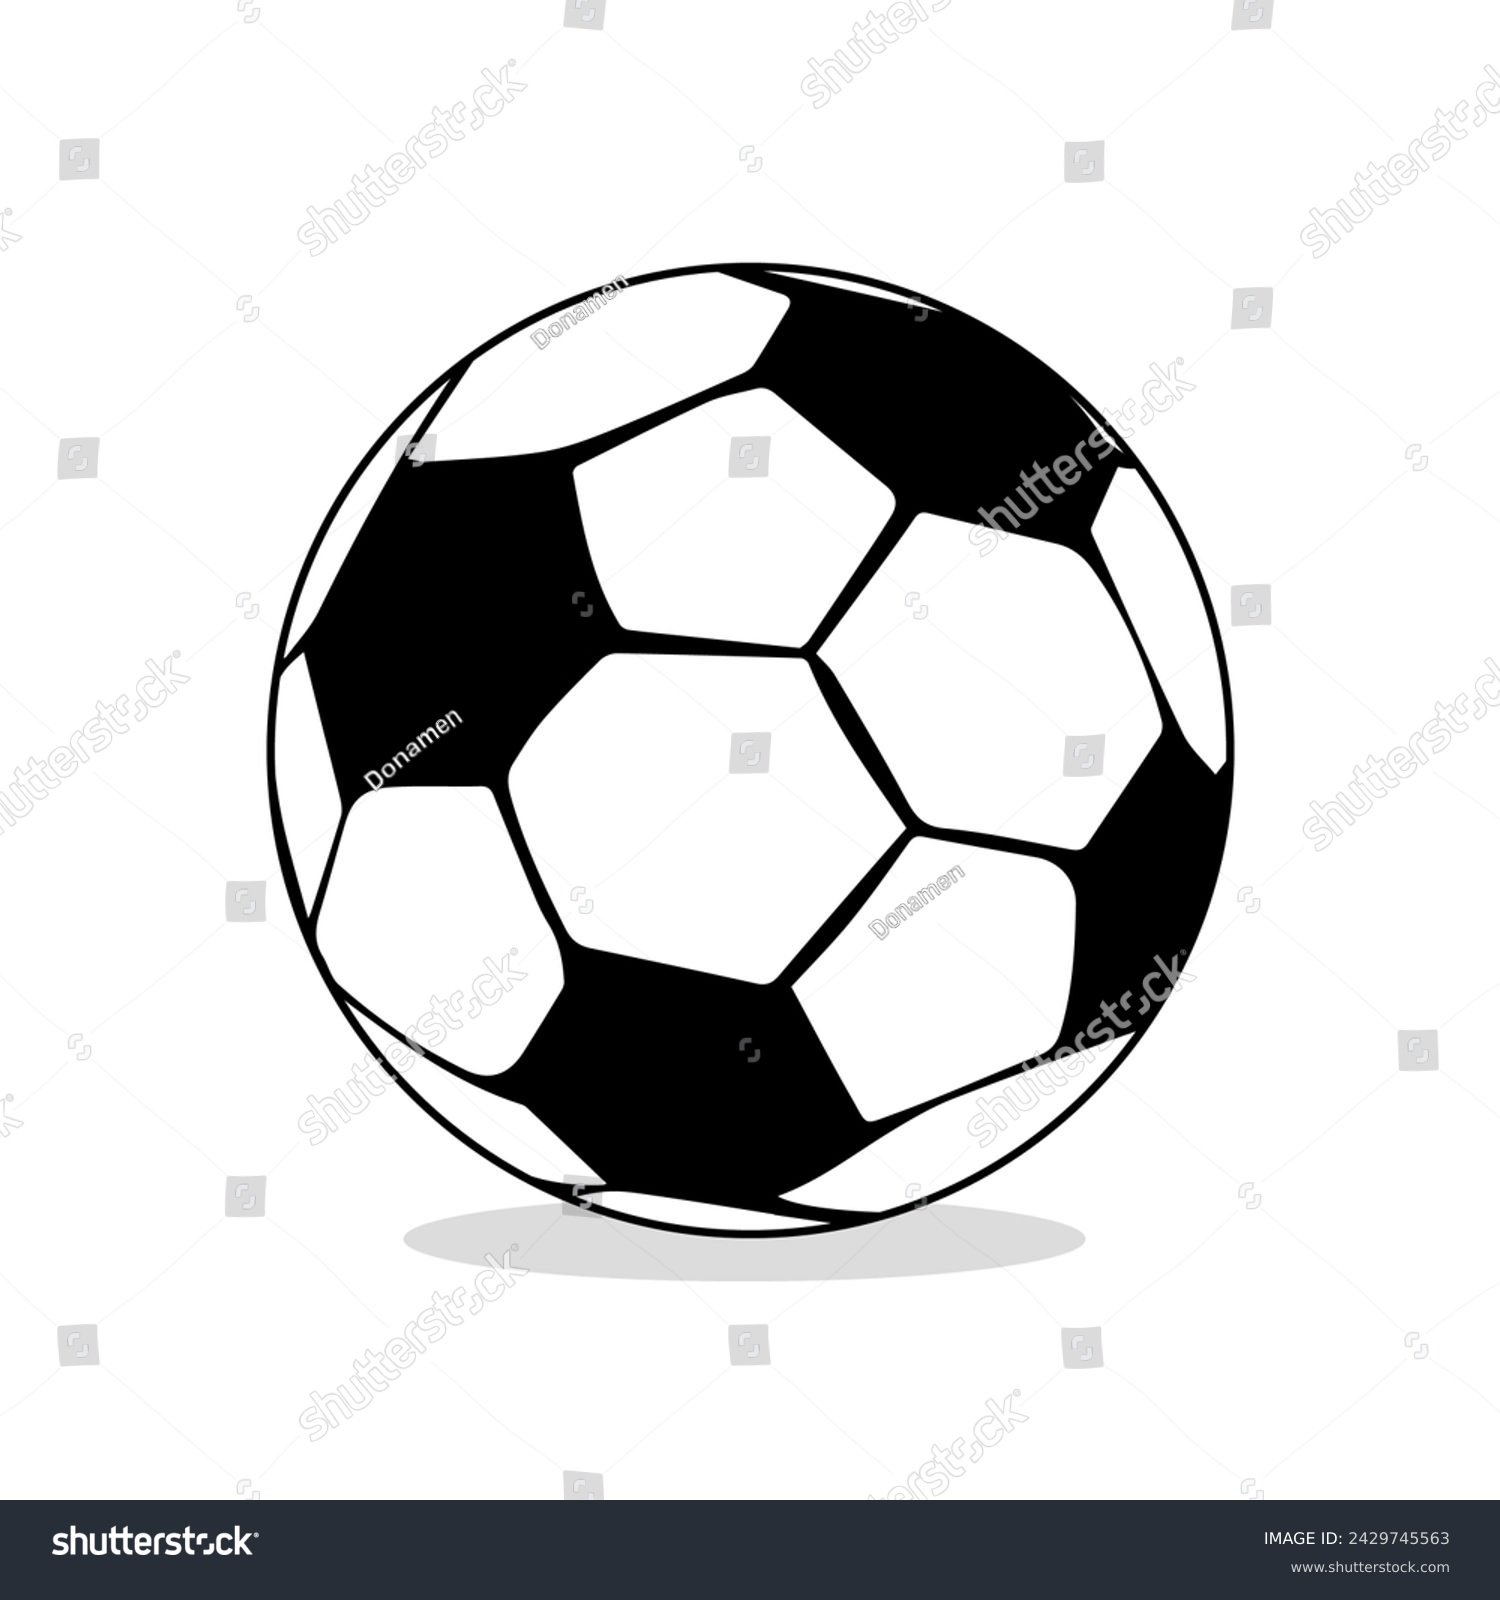 SVG of Classic Monochrome Soccer Ball on White Background. Silhouette of a Football Isolated on White. svg